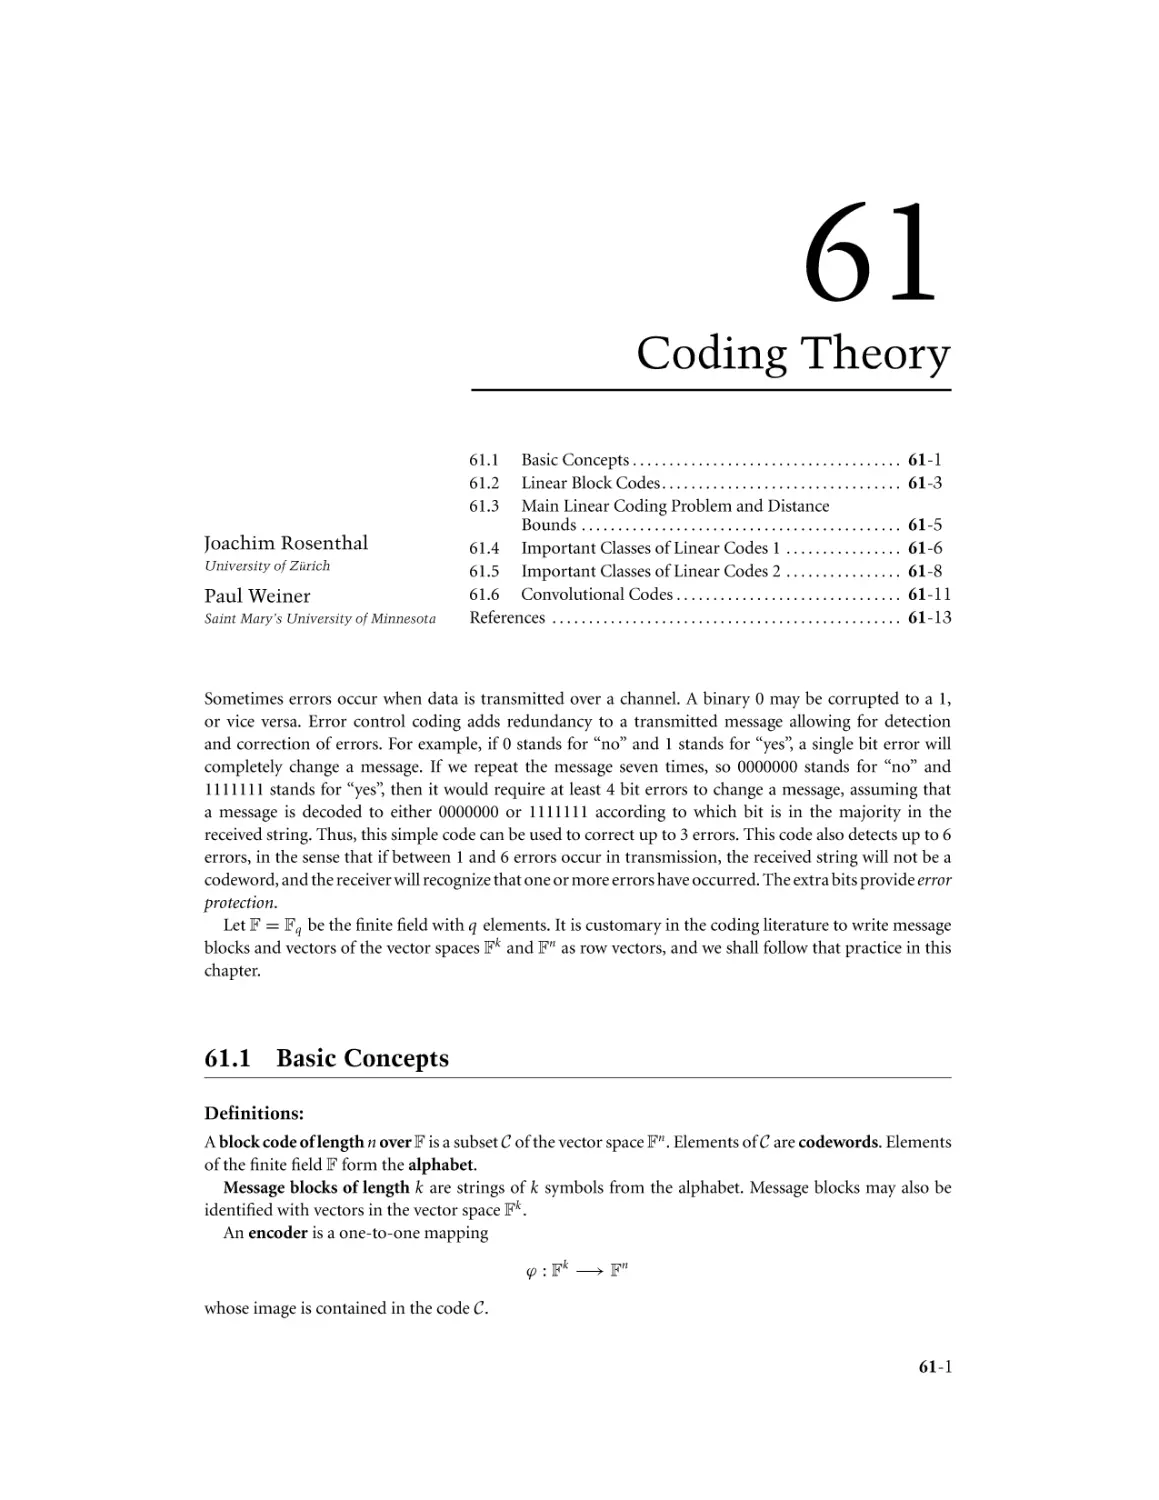 Chapter 61. Coding Theory